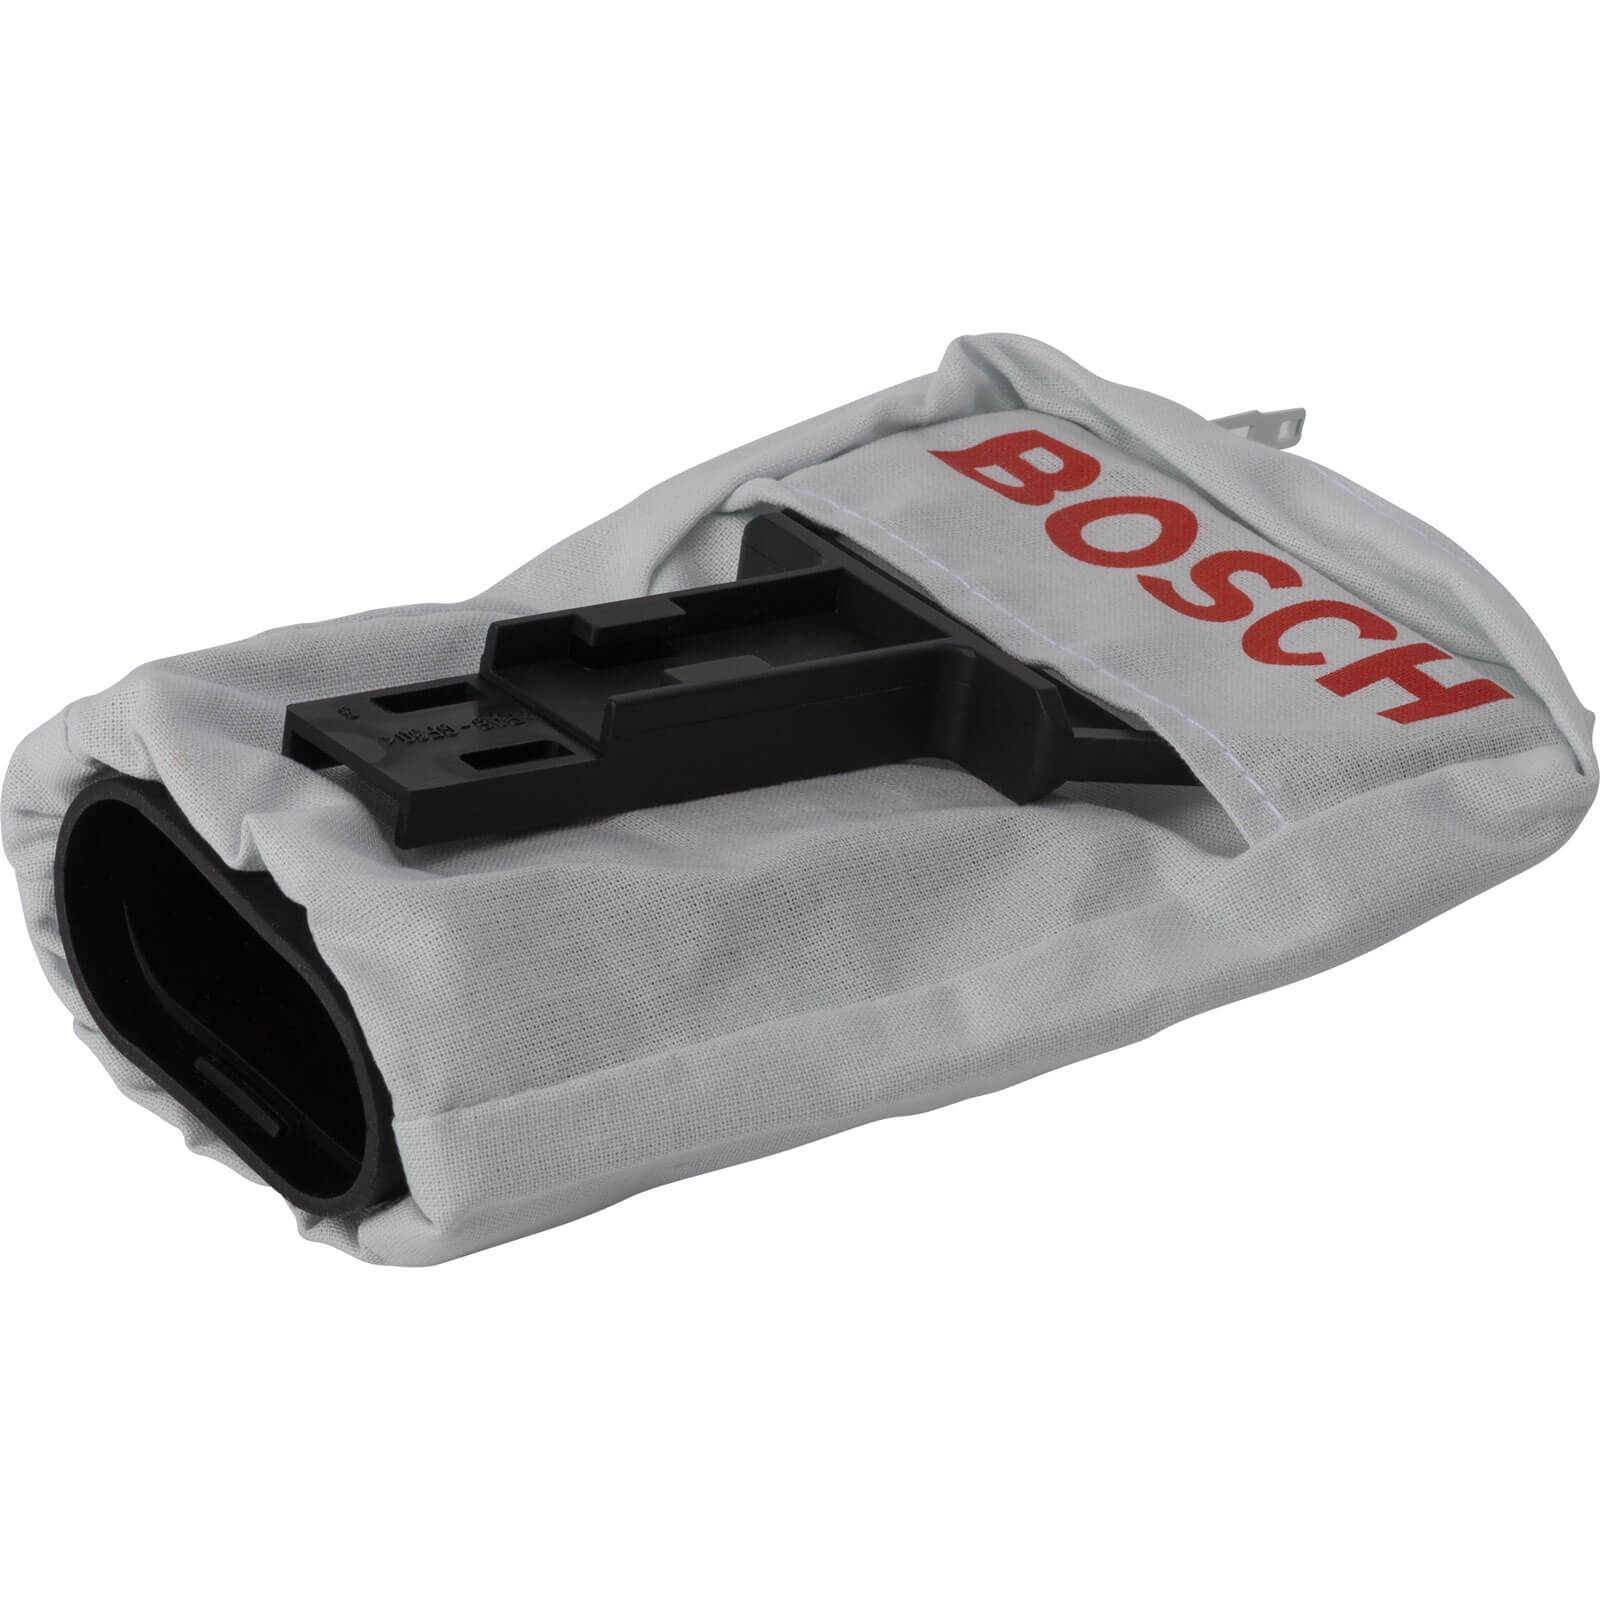 Photo of Bosch Dust Bag For Gss 230 And 280 Orbital Sanders